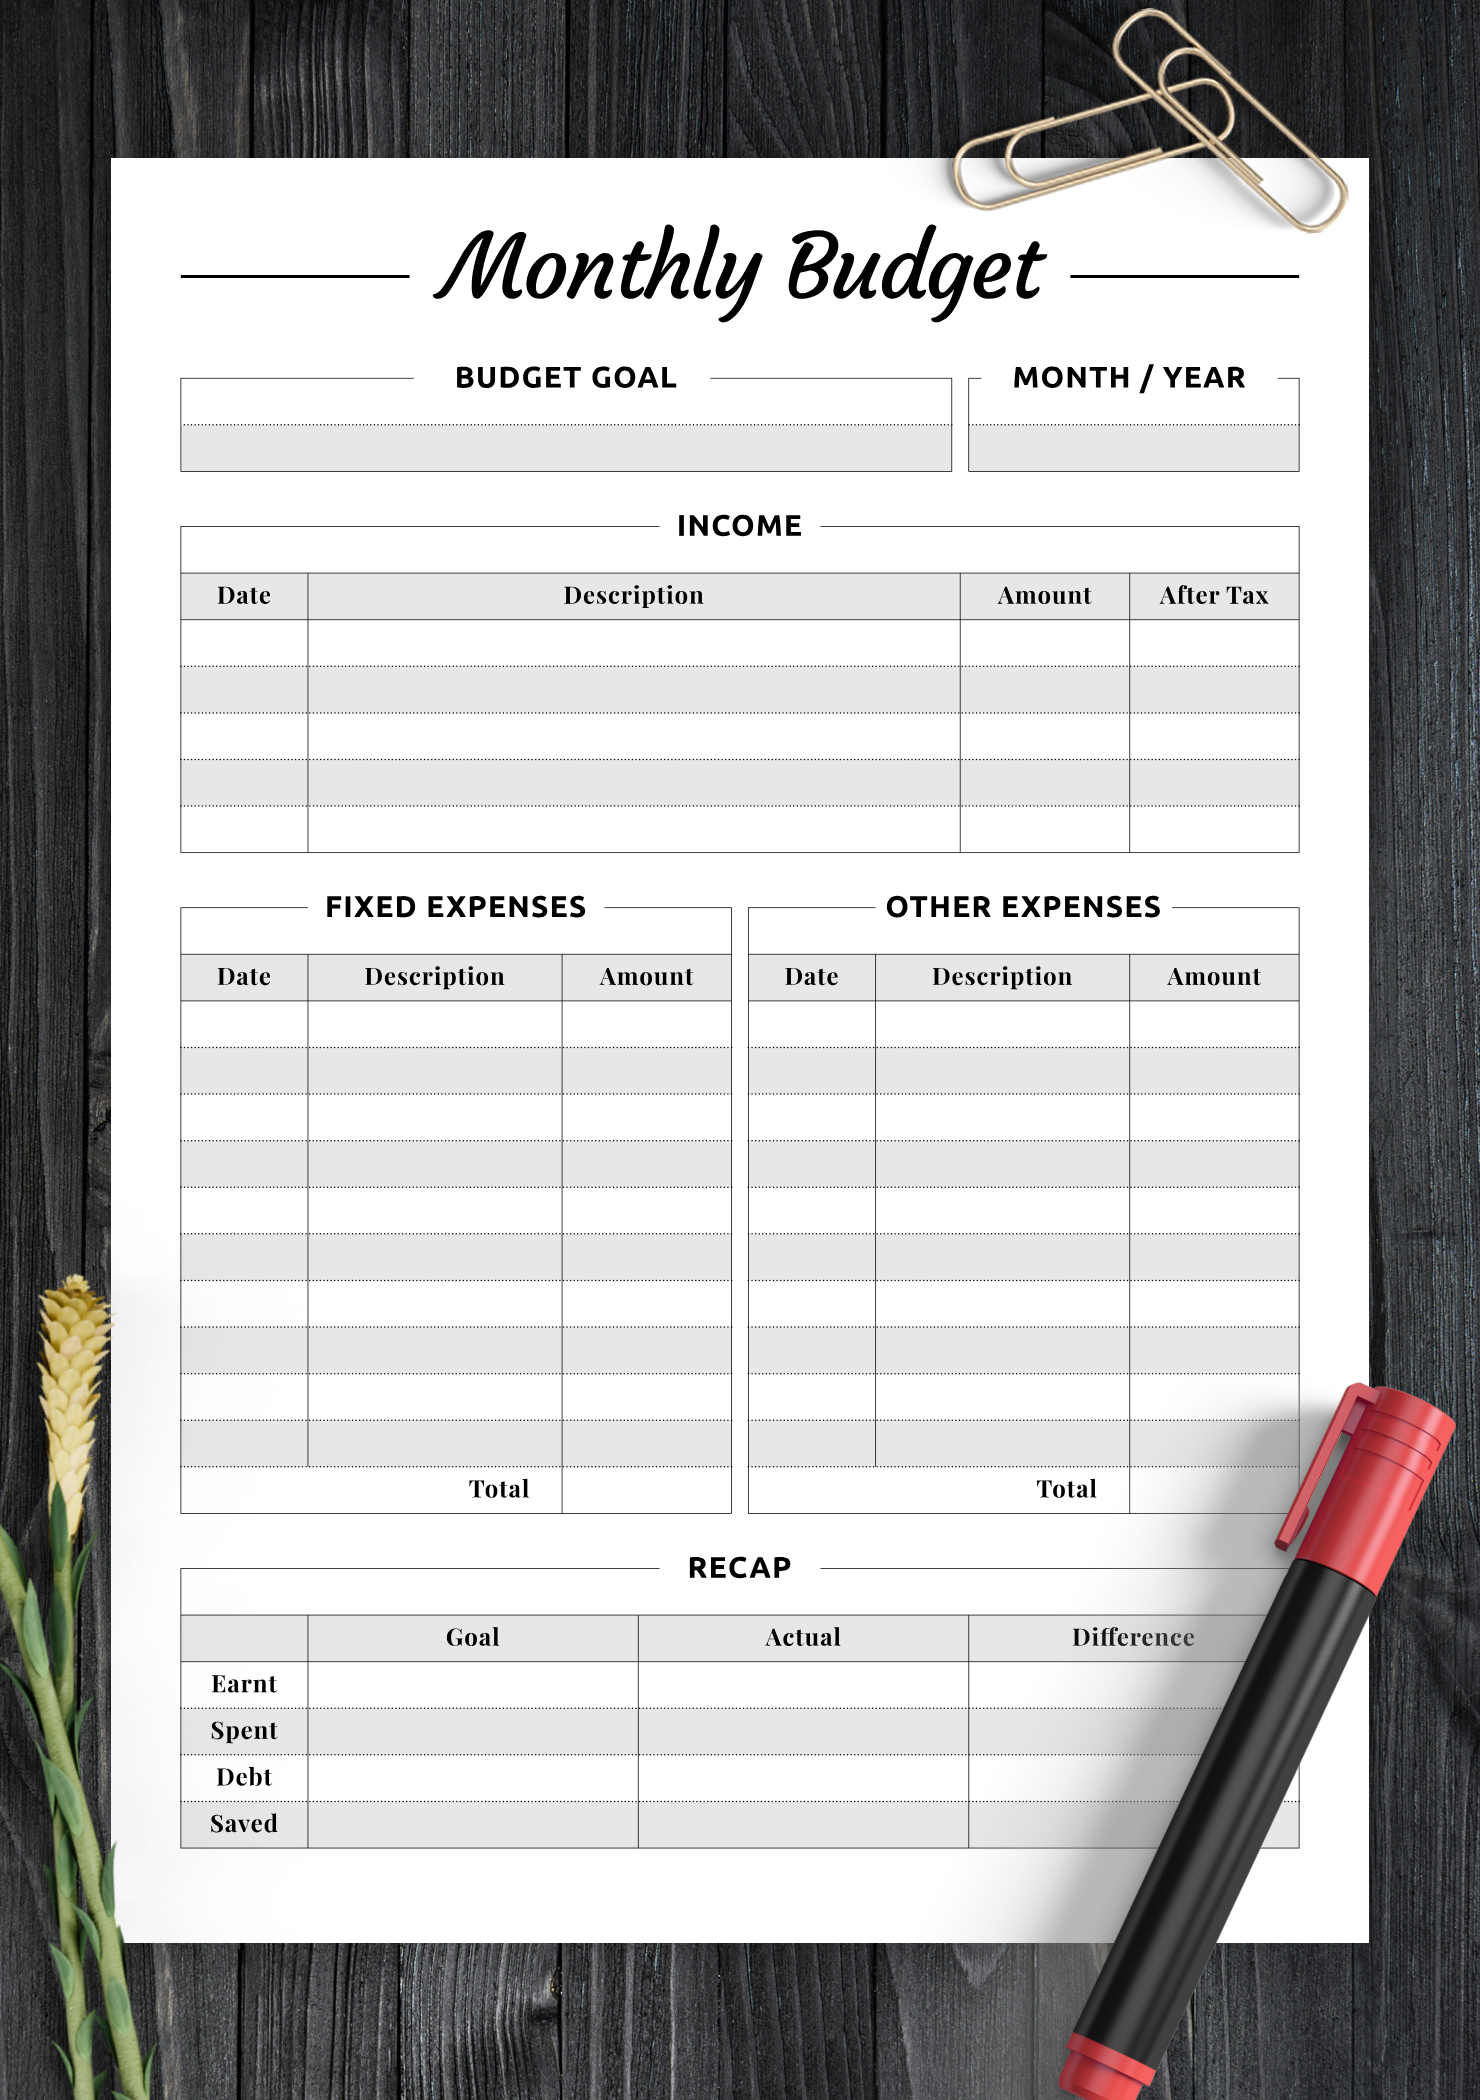 Download Printable Monthly Budget With Recap Section Pdf pertaining to Best Budget Planner Template Pdf